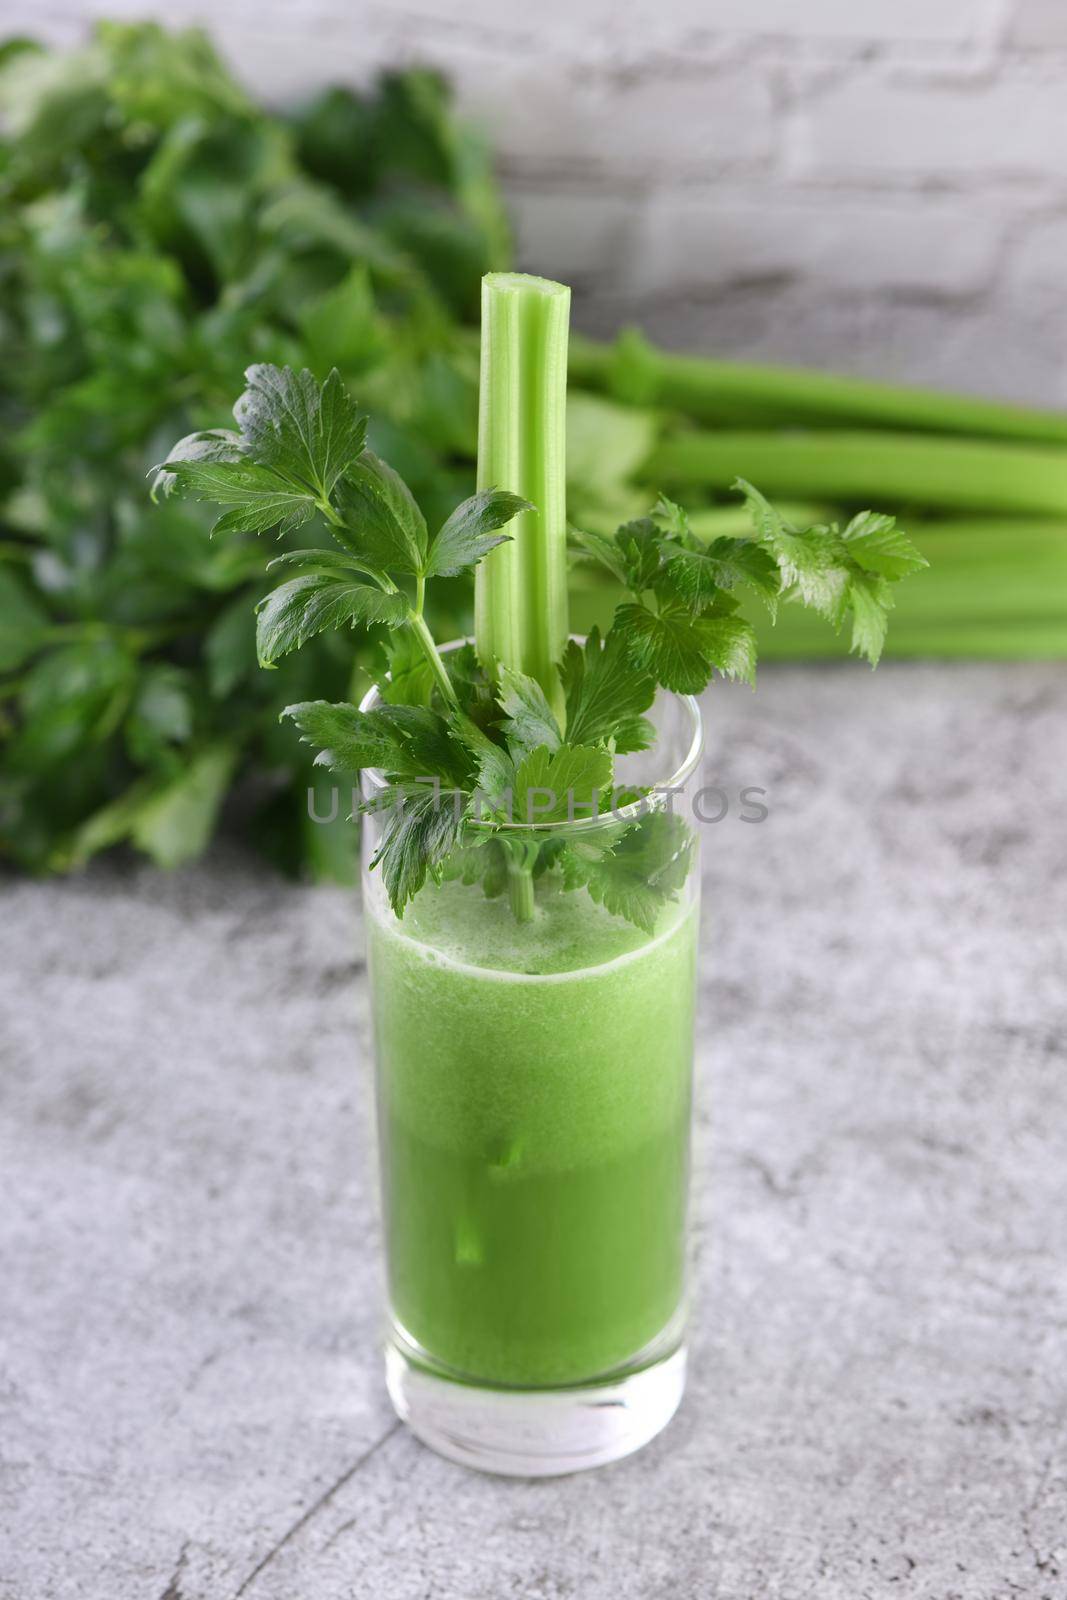  Glass of freshly made celery smoothie.   by Apolonia